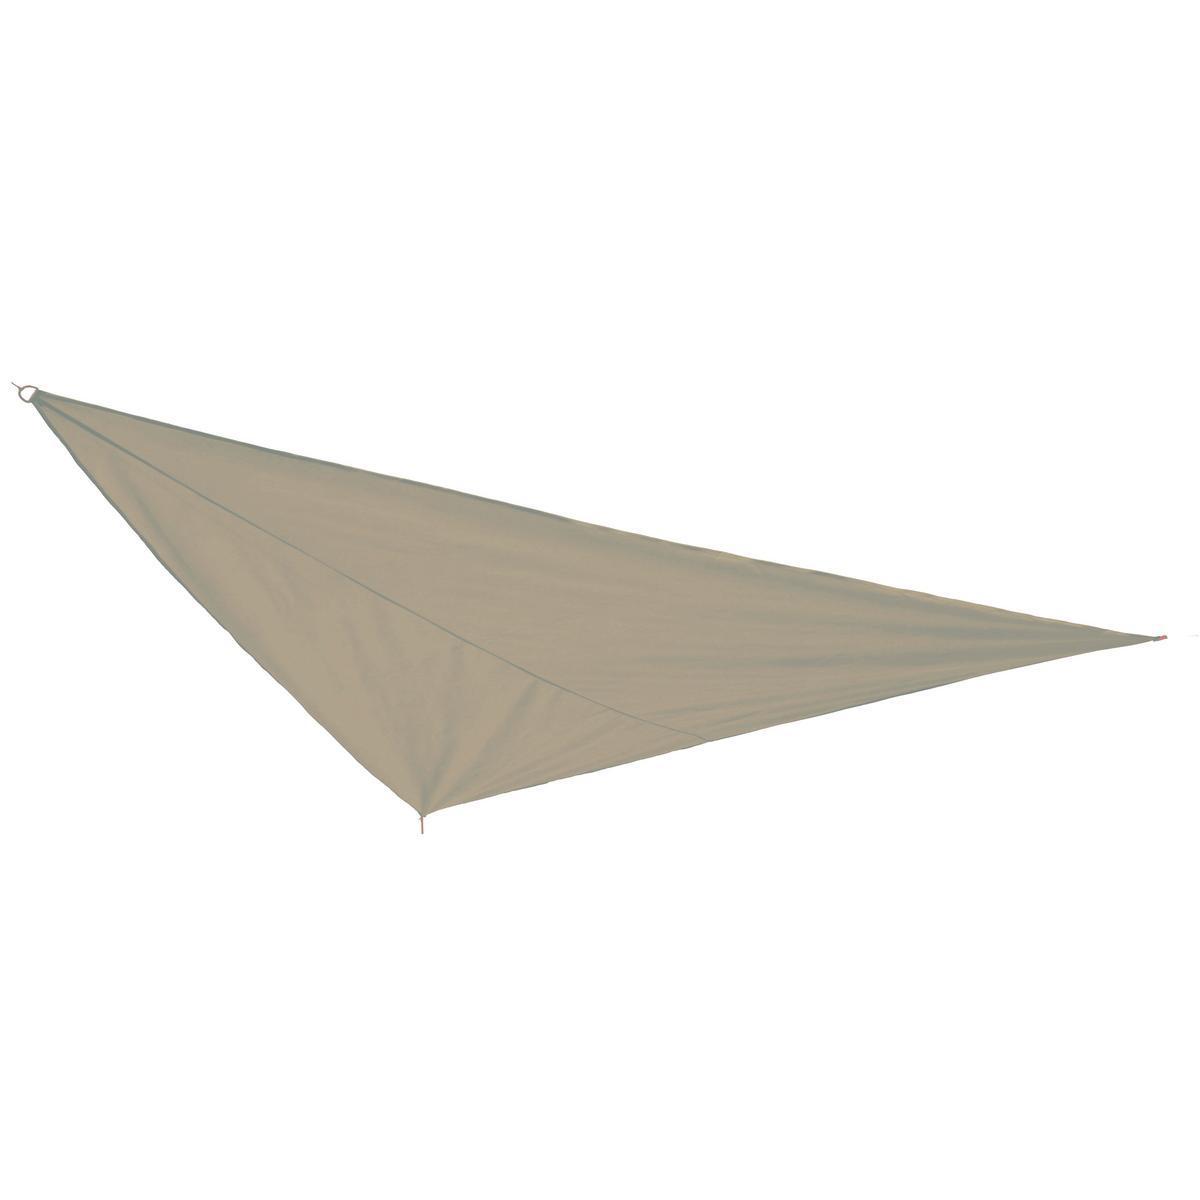 Voile d'ombrage triangulaire - Polyester et Polyamide - 3 x 3 x 3 m - Taupe